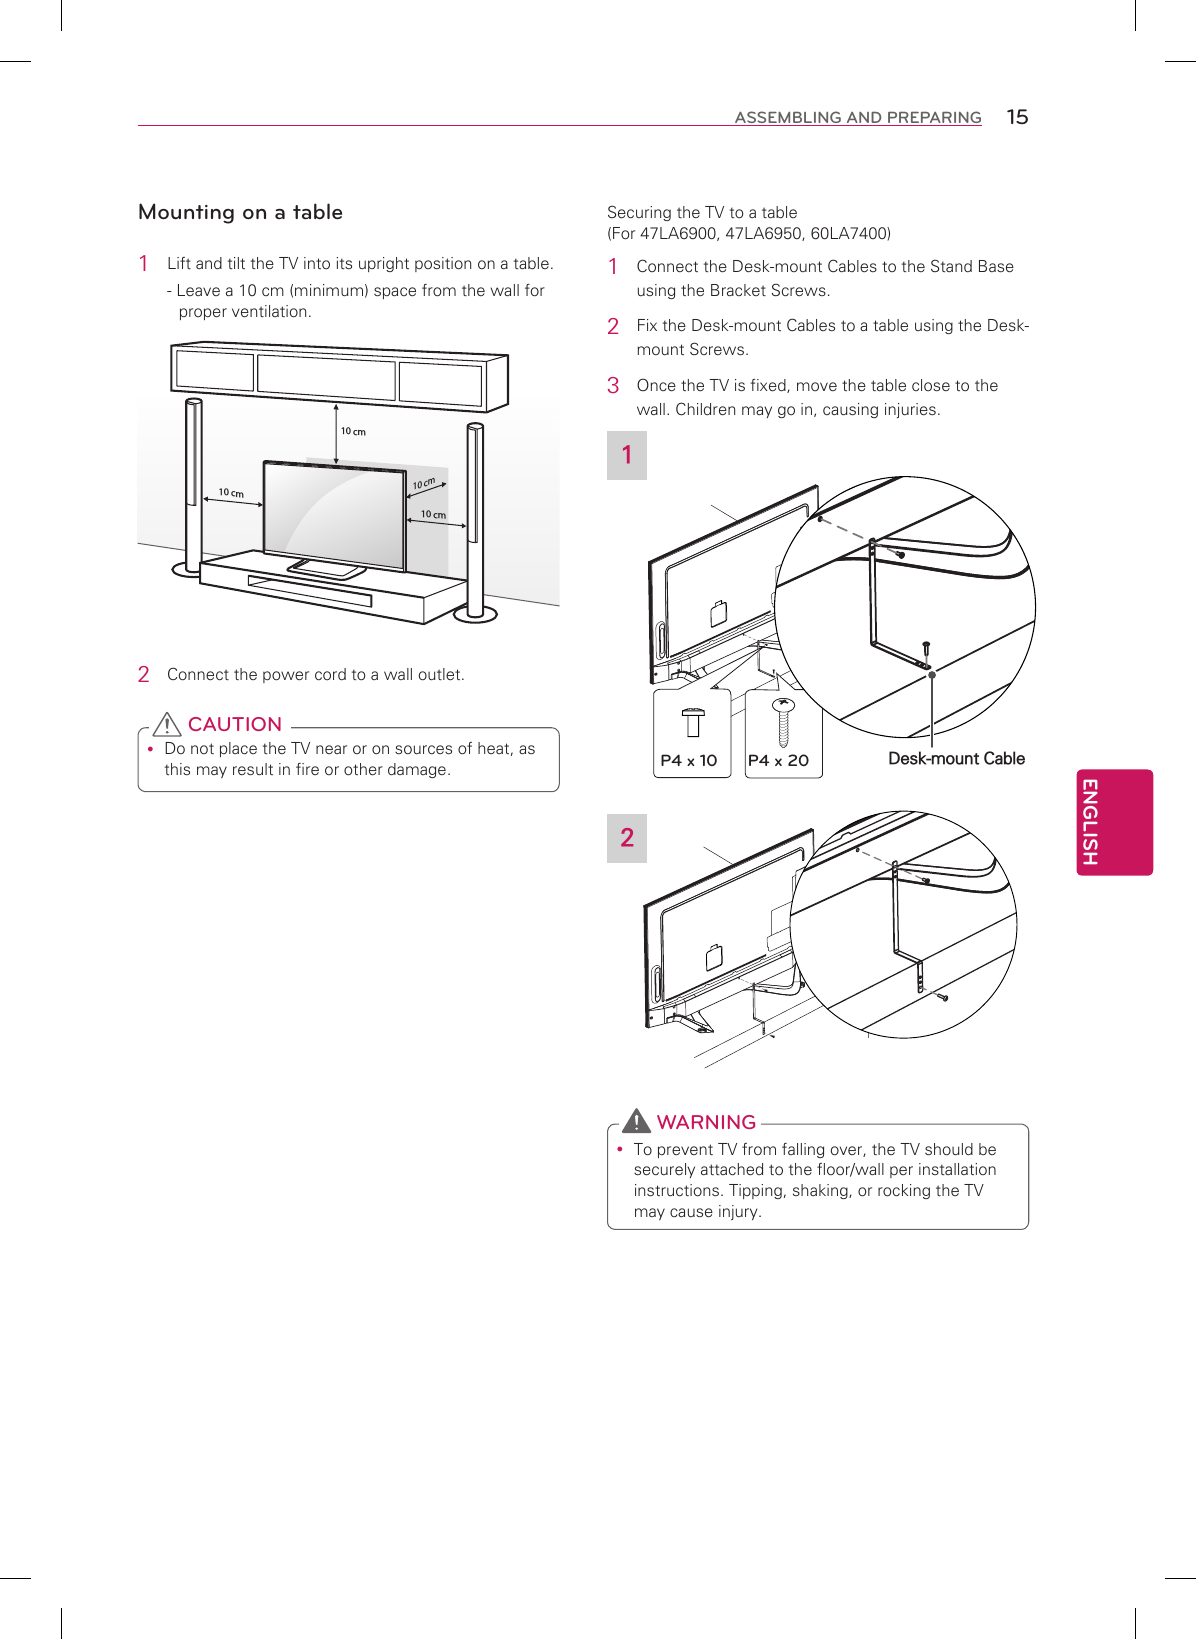 ENGLISH15ASSEMBLING AND PREPARINGMounting on a table1  Lift and tilt the TV into its upright position on a table.- Leave a 10 cm (minimum) space from the wall for proper ventilation.10 cm10 cm10 cm10 cm2  Connect the power cord to a wall outlet. yDo not place the TV near or on sources of heat, as this may result in fire or other damage. CAUTIONSecuring the TV to a table (For 47LA6900, 47LA6950, 60LA7400)1  Connect the Desk-mount Cables to the Stand Base using the Bracket Screws.2  Fix the Desk-mount Cables to a table using the Desk-mount Screws.3 Once the TV is fixed, move the table close to the wall. Children may go in, causing injuries.1Desk-mount CableP4 x 10 P4 x 202 yTo prevent TV from falling over, the TV should be securely attached to the floor/wall per installation instructions. Tipping, shaking, or rocking the TV may cause injury. WARNING